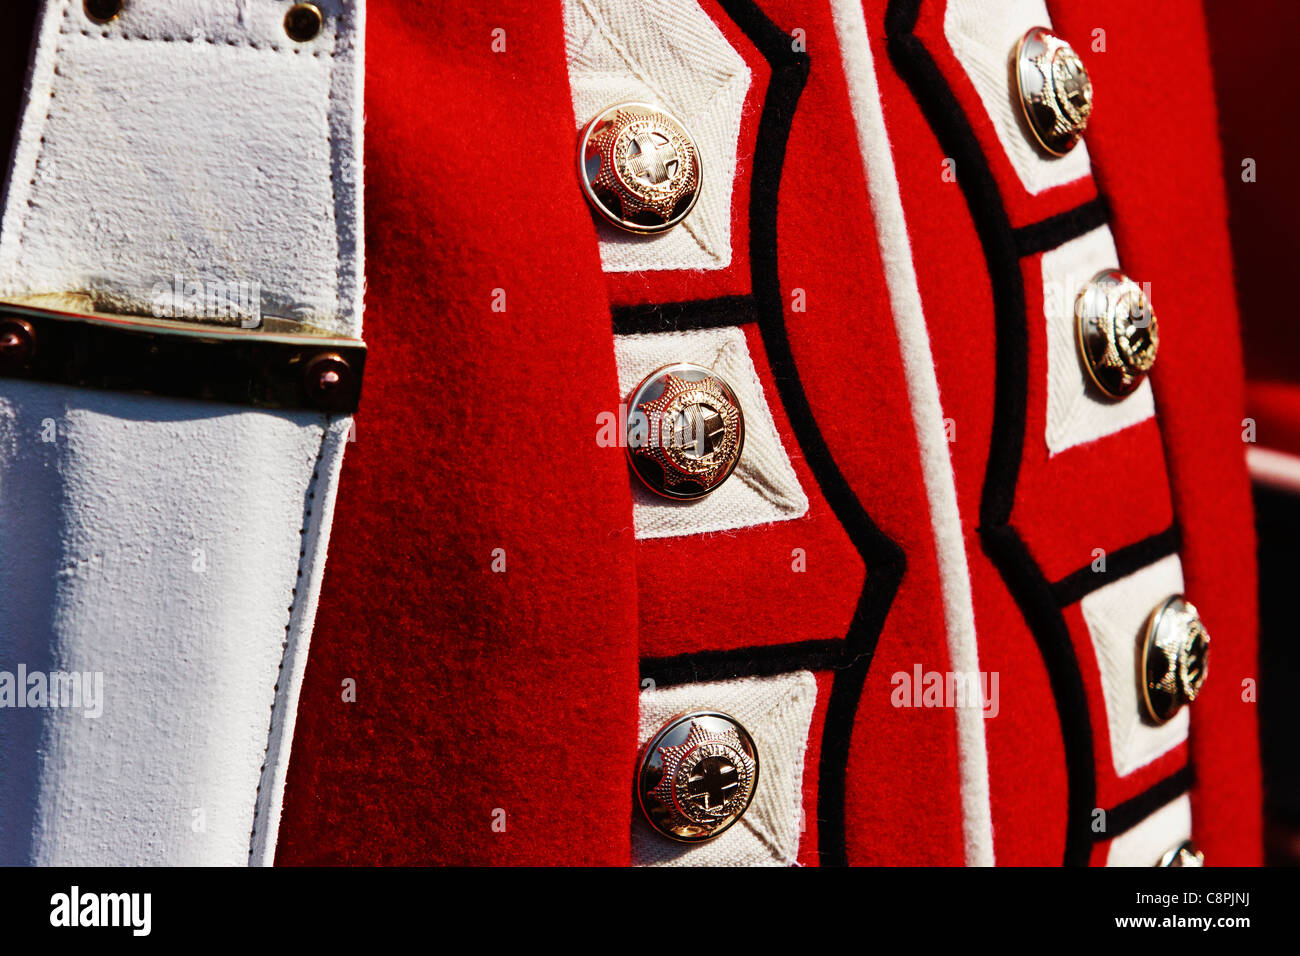 Closeup of the buttons on the Foot Guard's jacket, London. Stock Photo